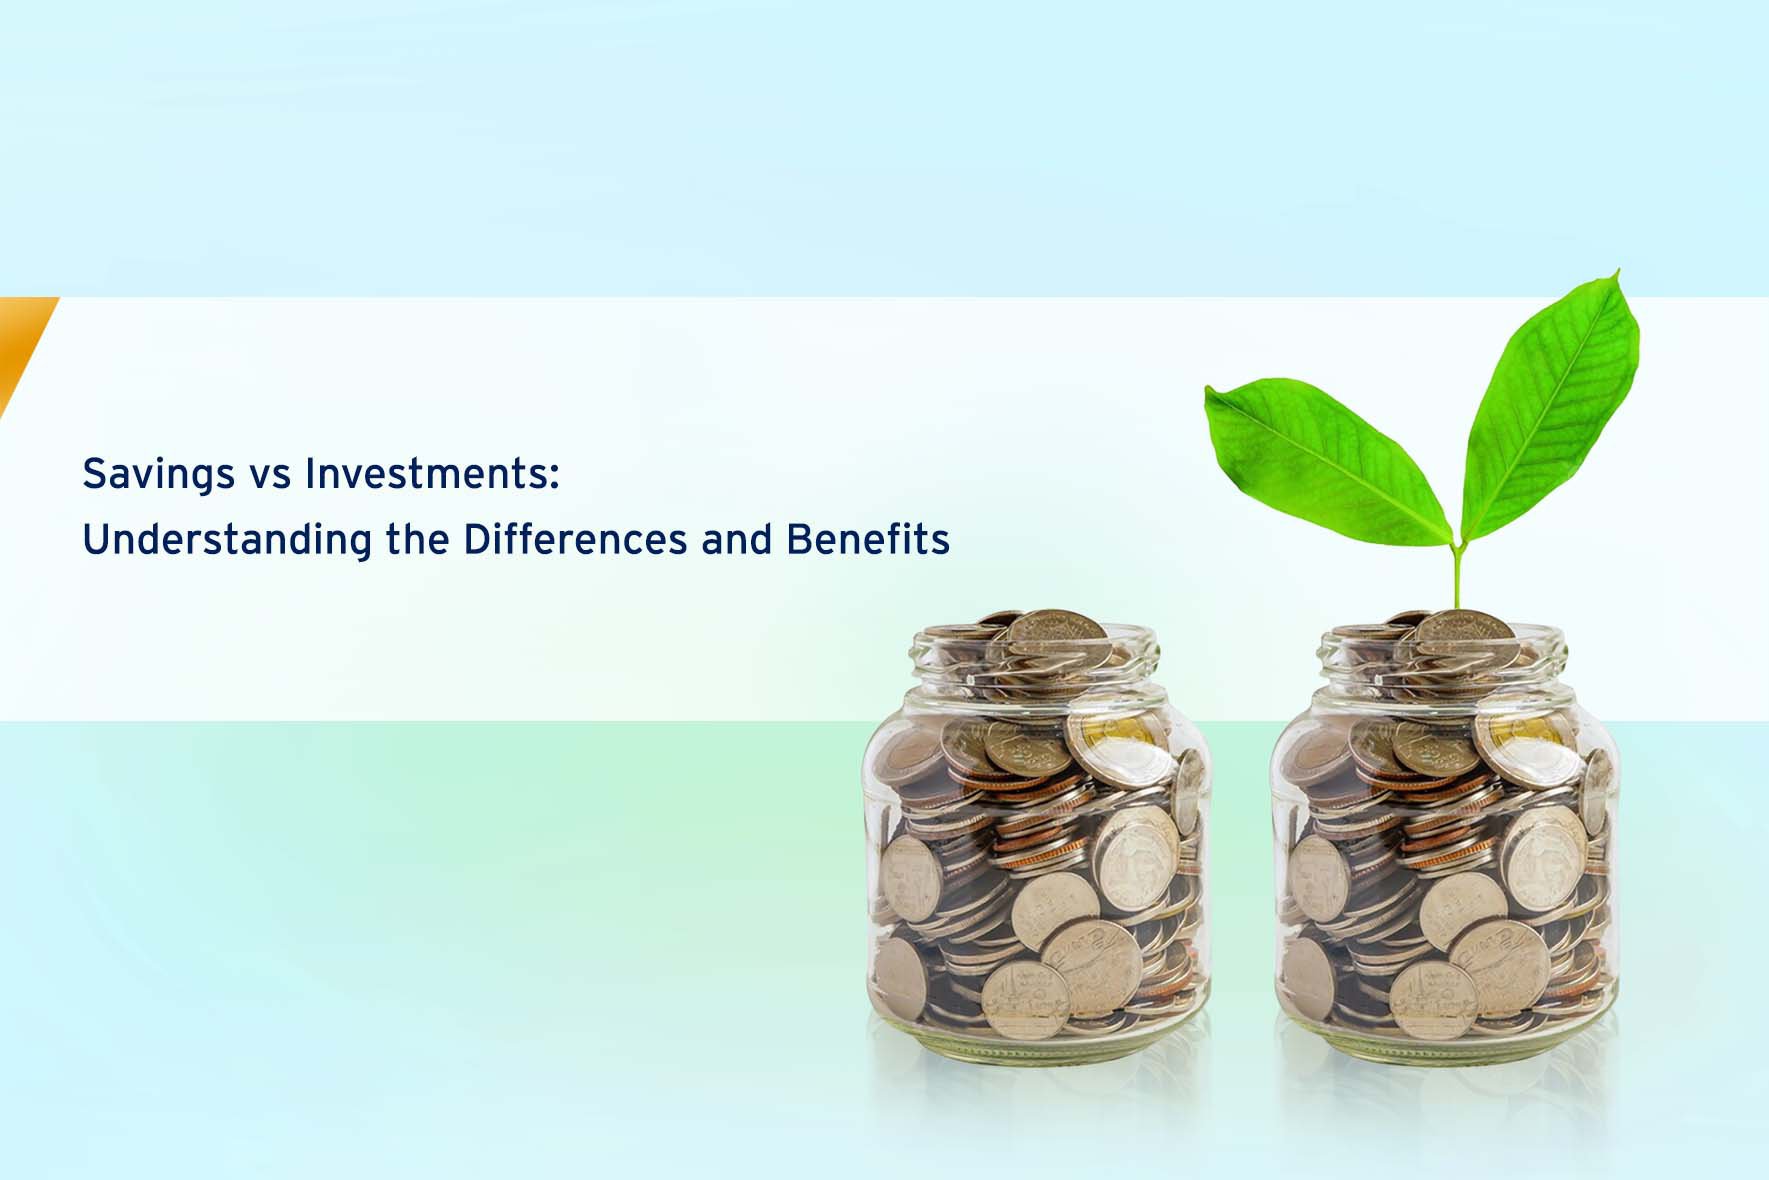 Deep understanding of how savings and investments